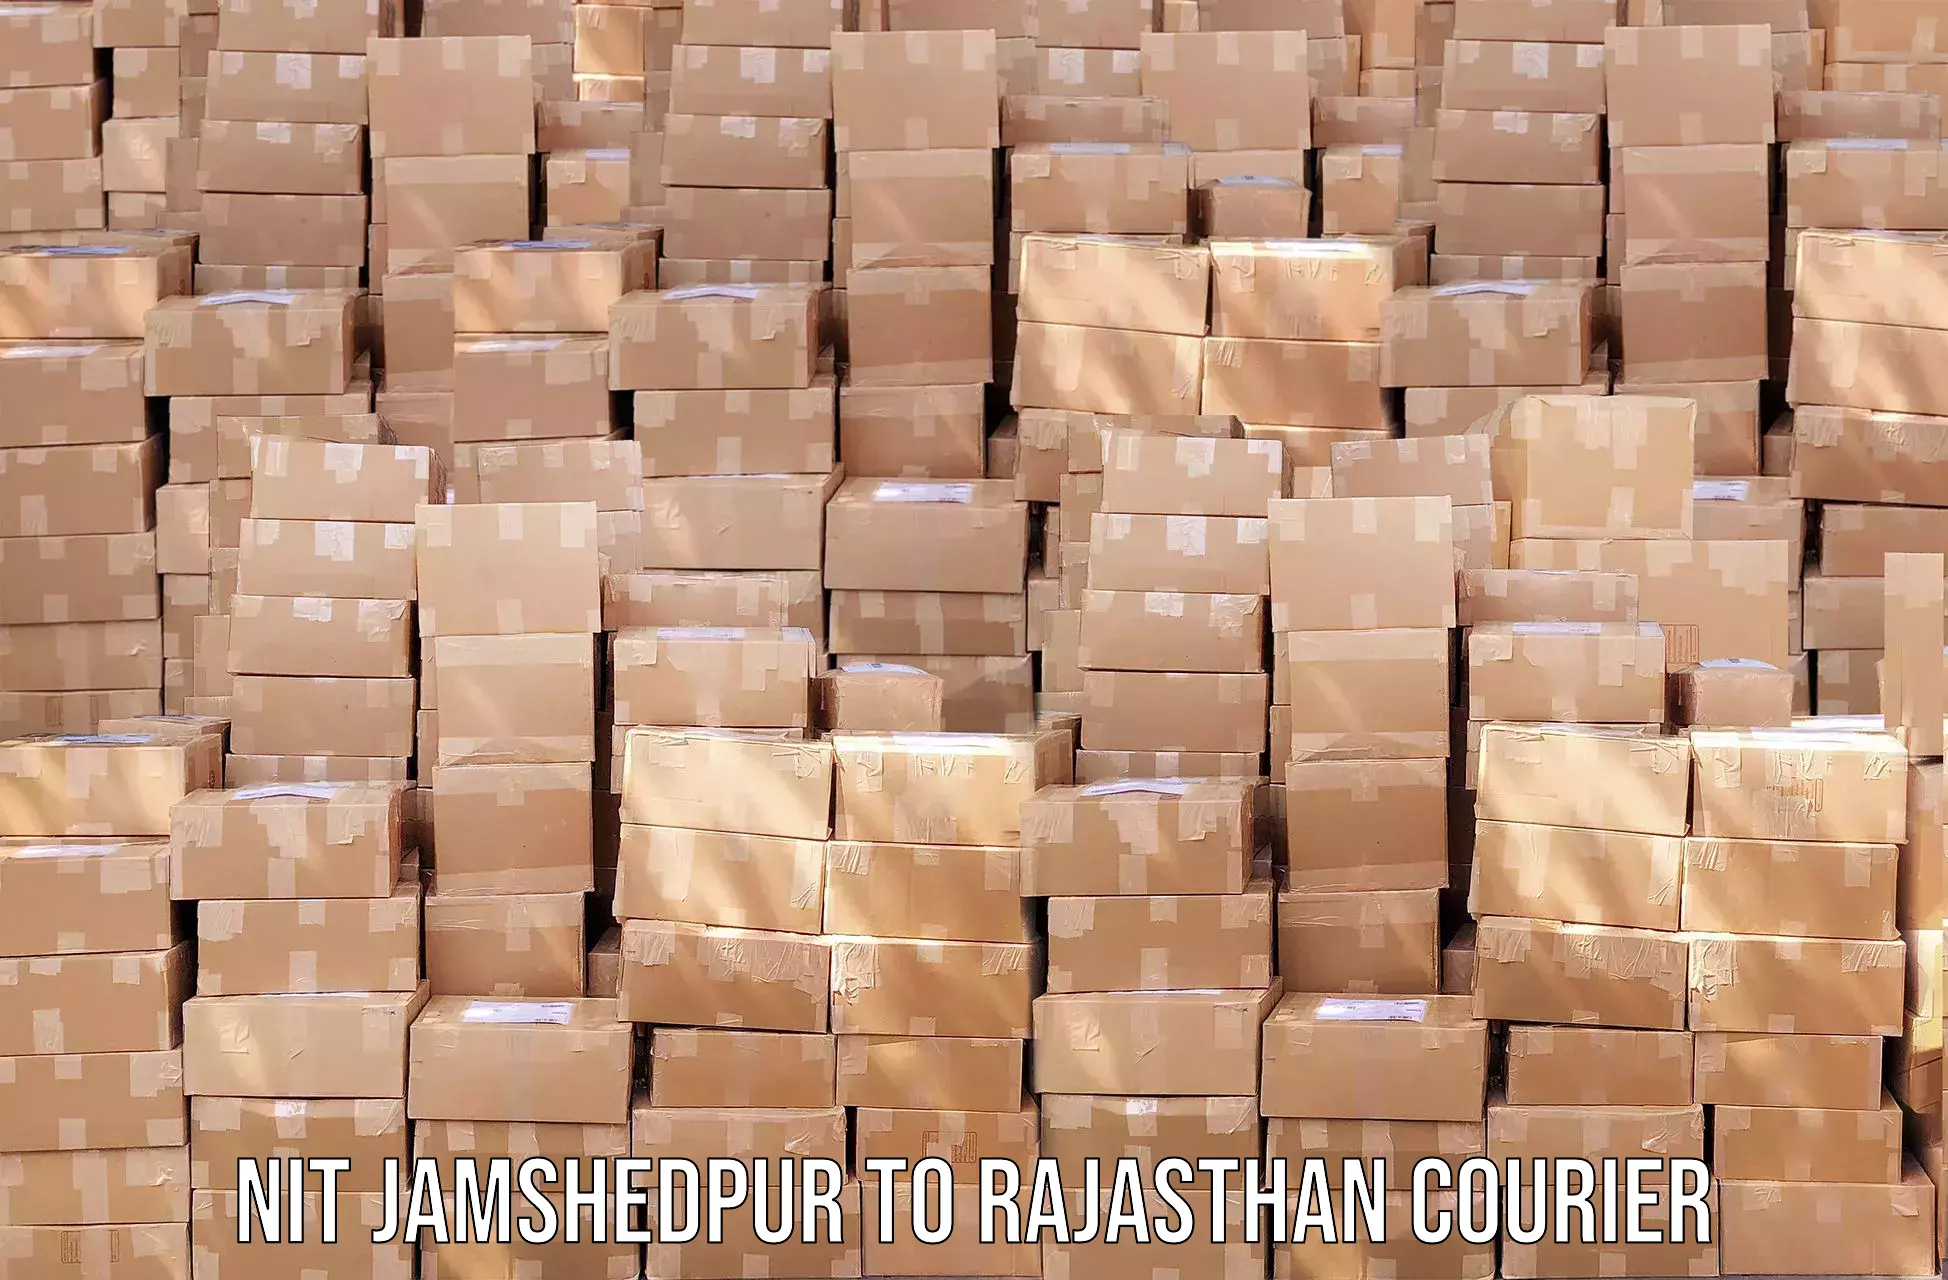 Courier service comparison NIT Jamshedpur to Yeswanthapur